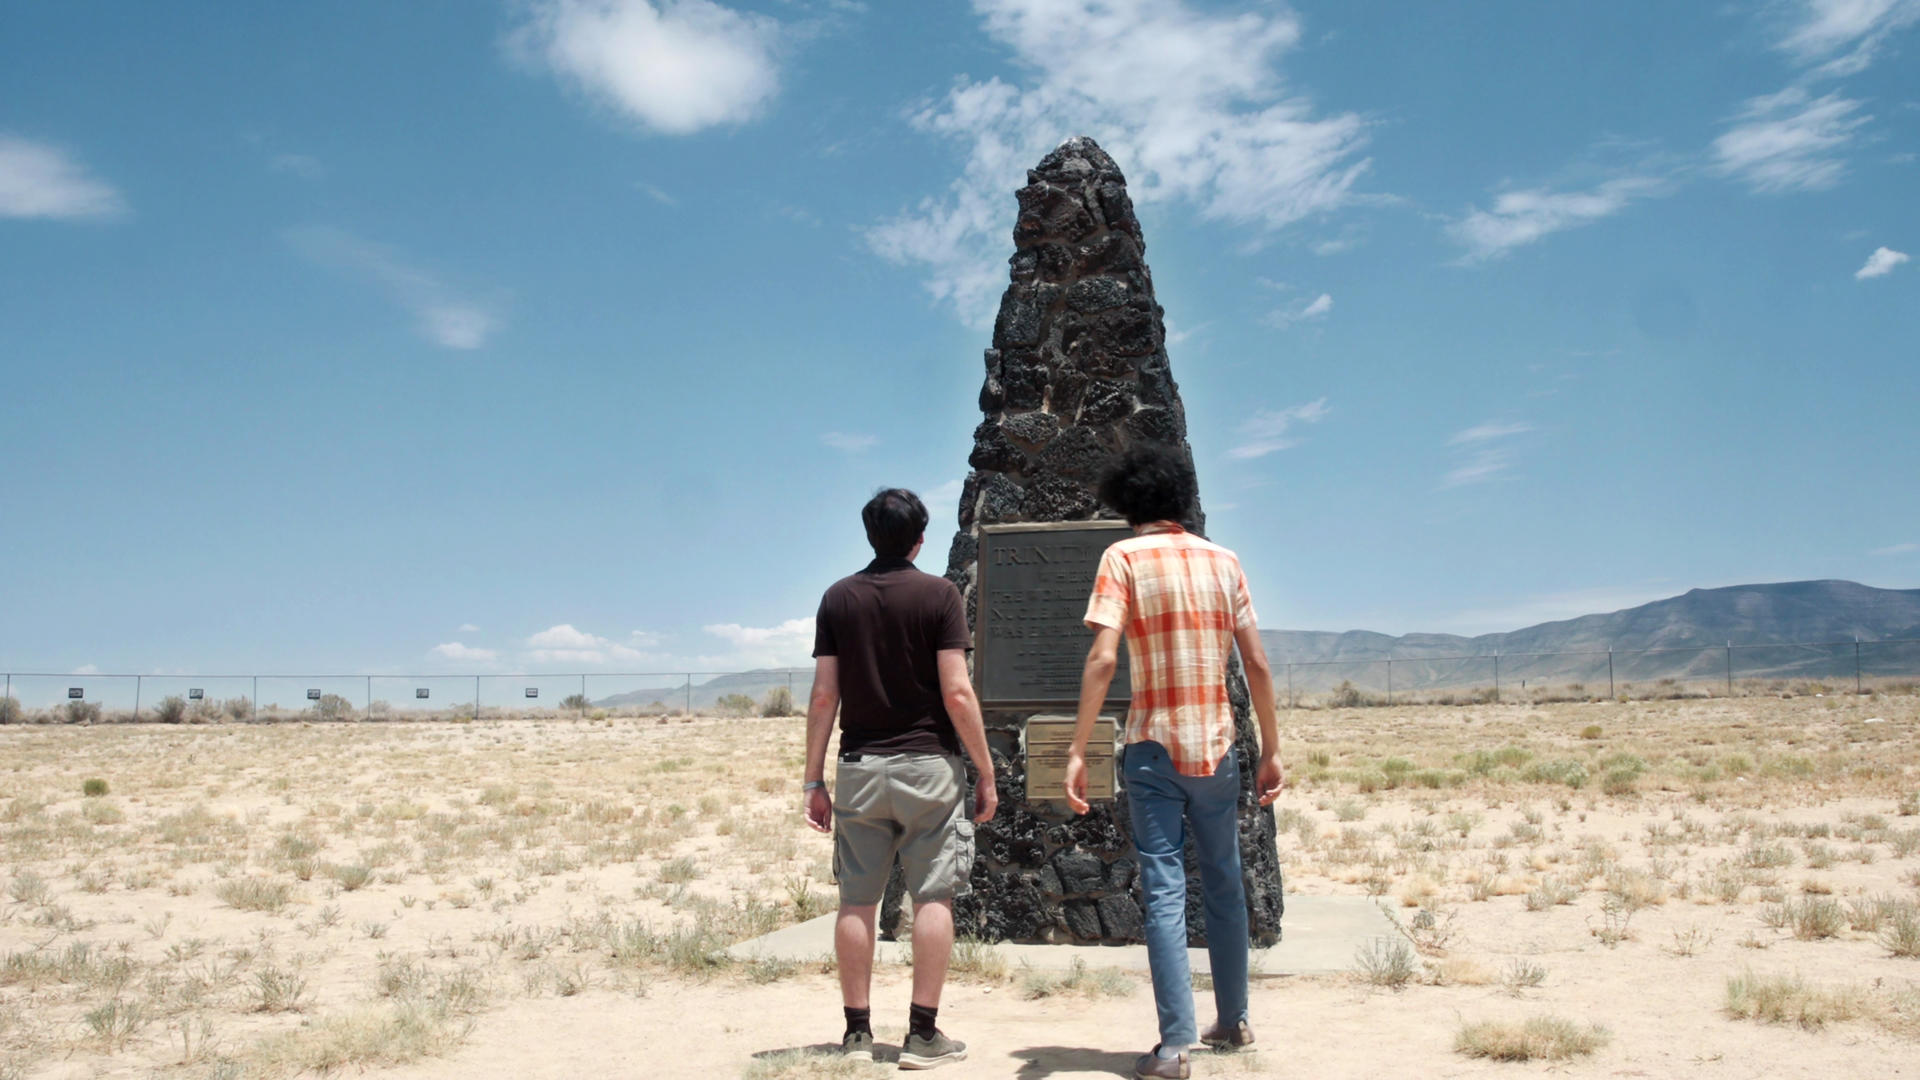 Nuclear weapons are polarizing and Latif explores issues from both sides of the coin during one of the episodes from Connected. Here he is at the test site of Trinity, the first nuclear explosion in the USA in 1945.